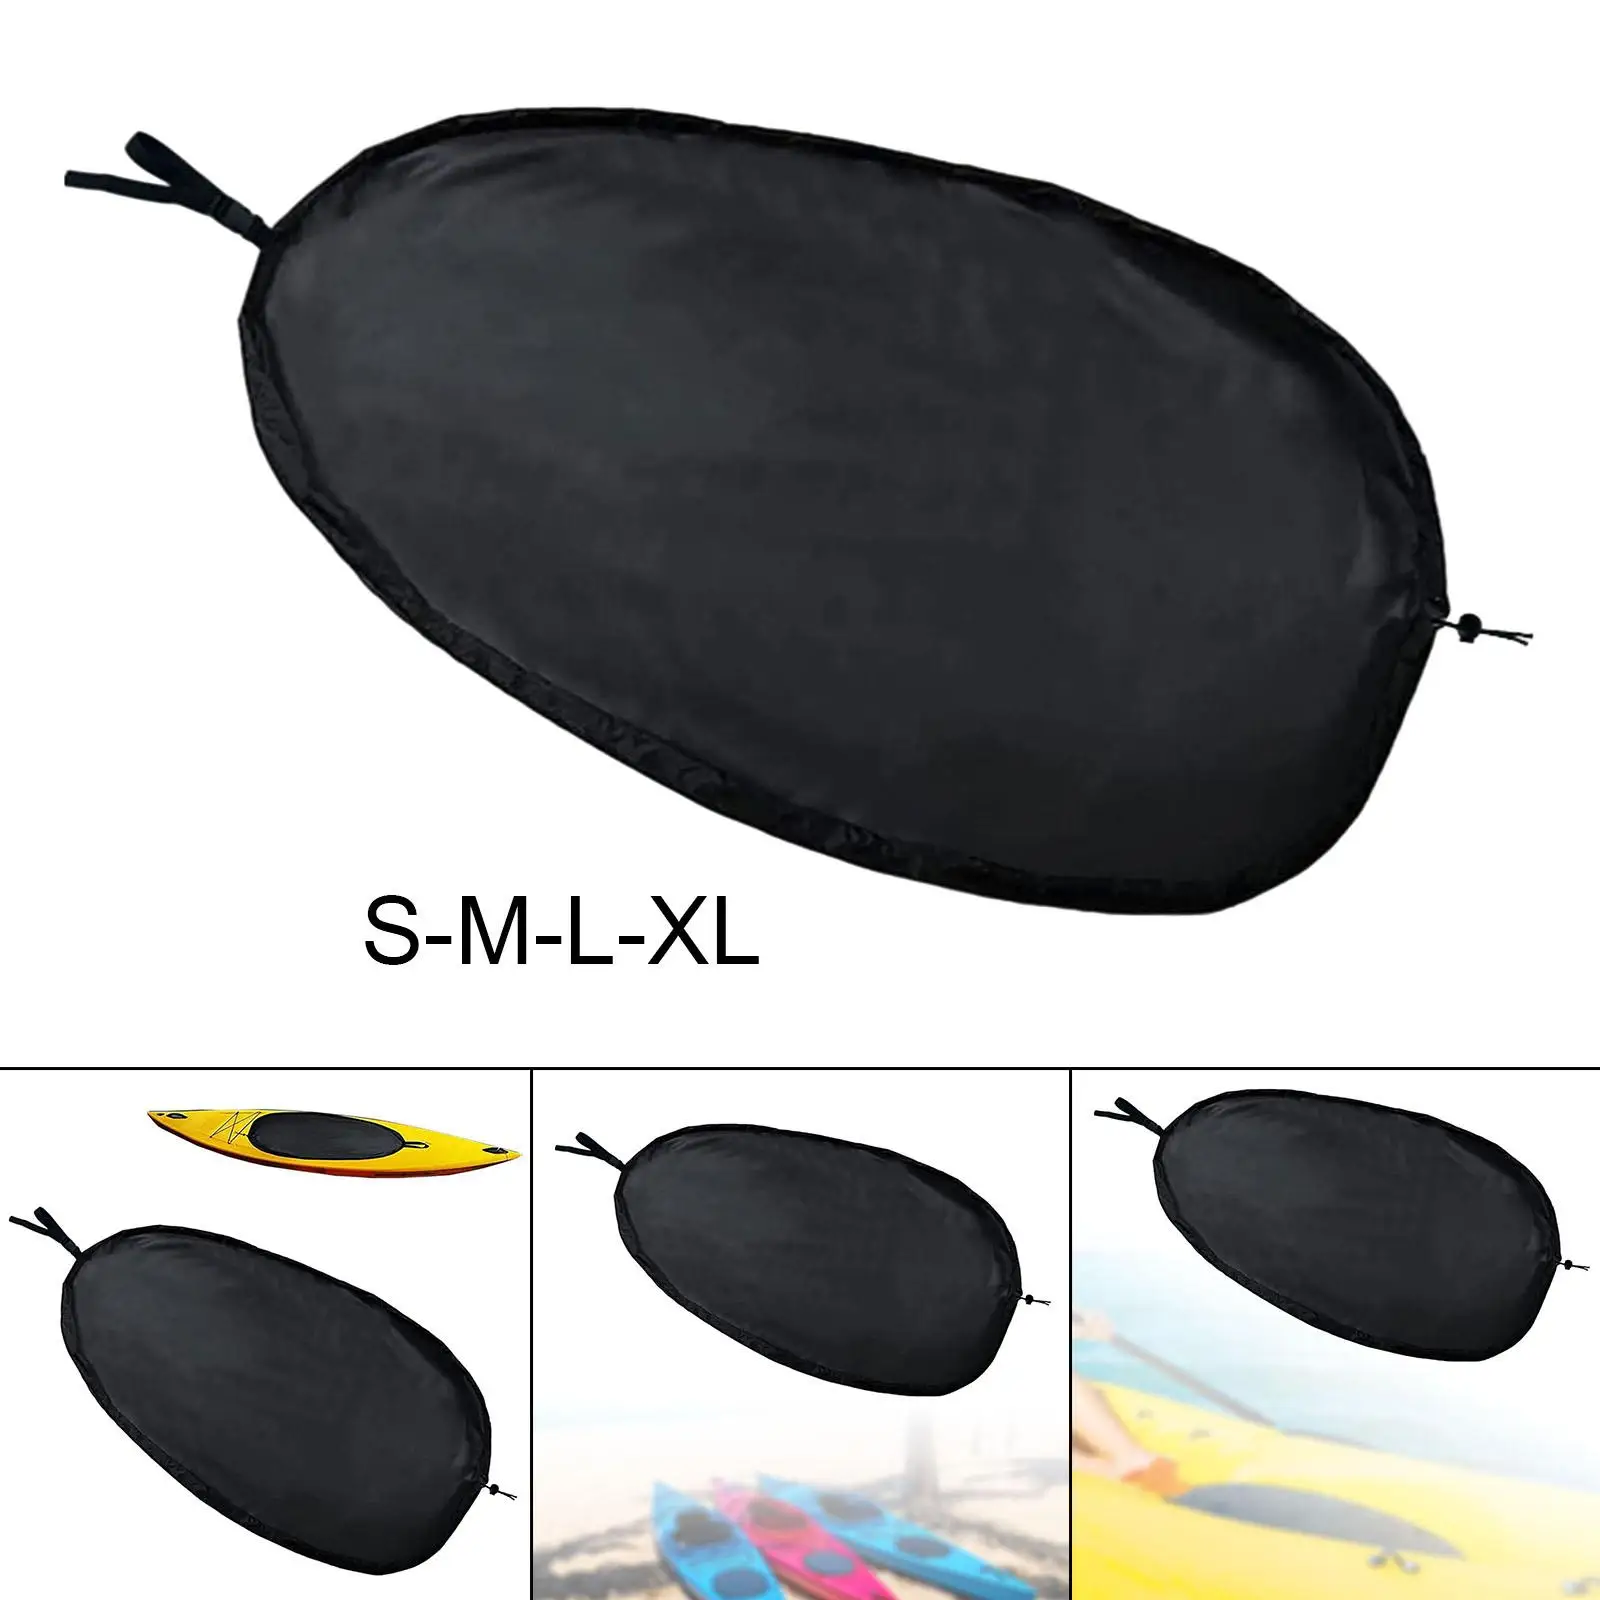 Kayak Cockpit Cover Protection Breathable Dust Proof Cover for Canoe